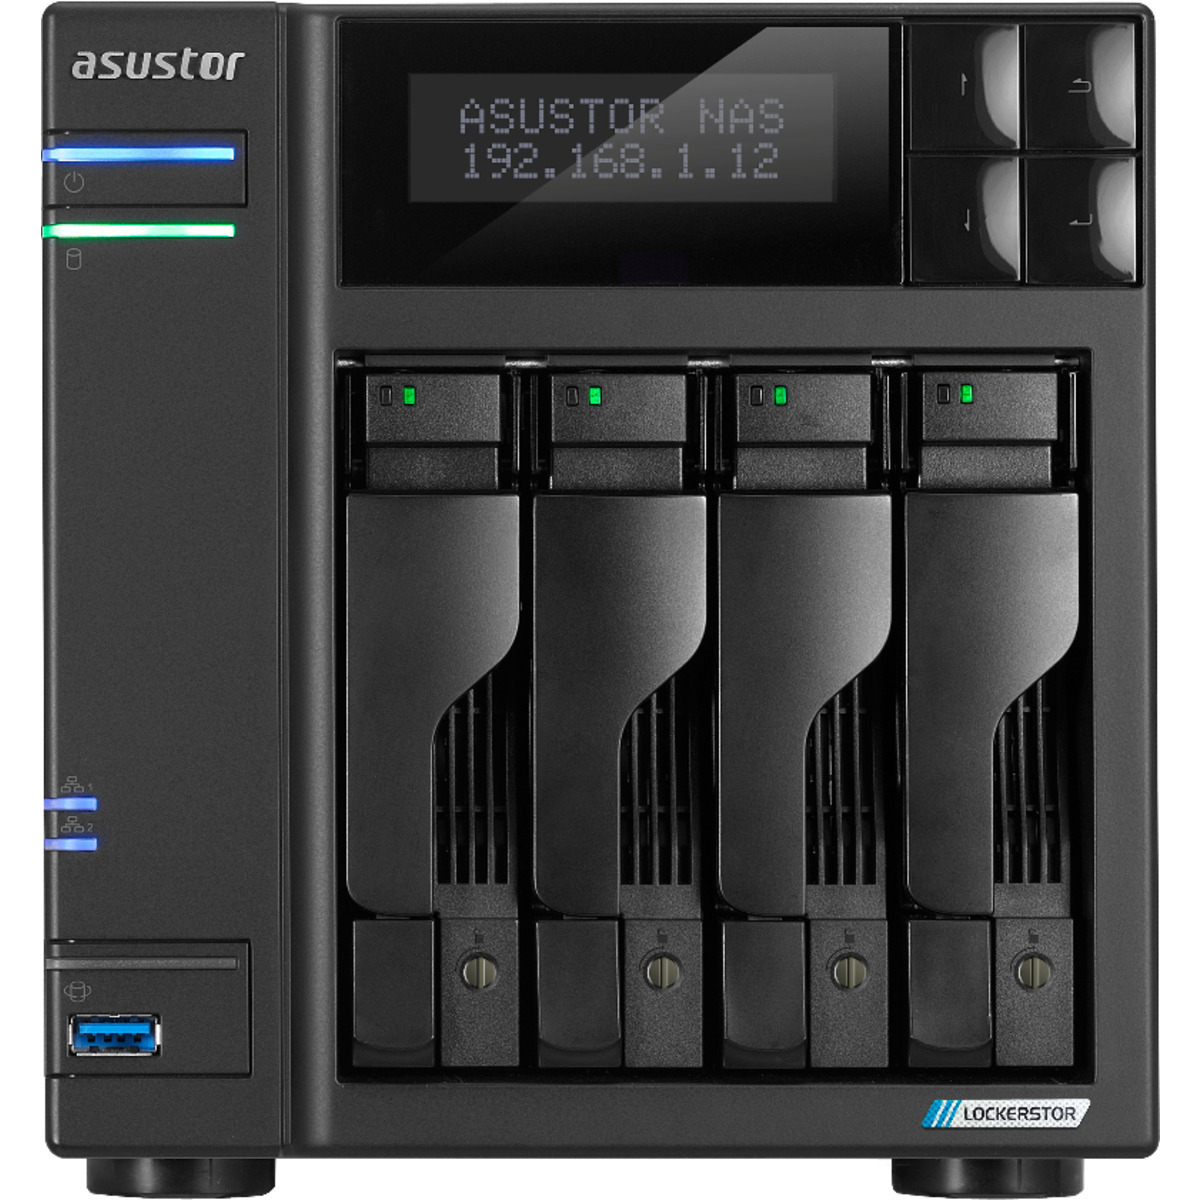 ASUSTOR LOCKERSTOR 4 Gen2 AS6704T 48tb 4-Bay Desktop Multimedia / Power User / Business NAS - Network Attached Storage Device 4x12tb Seagate IronWolf Pro ST12000NT001 3.5 7200rpm SATA 6Gb/s HDD NAS Class Drives Installed - Burn-In Tested - ON SALE - FREE RAM UPGRADE LOCKERSTOR 4 Gen2 AS6704T